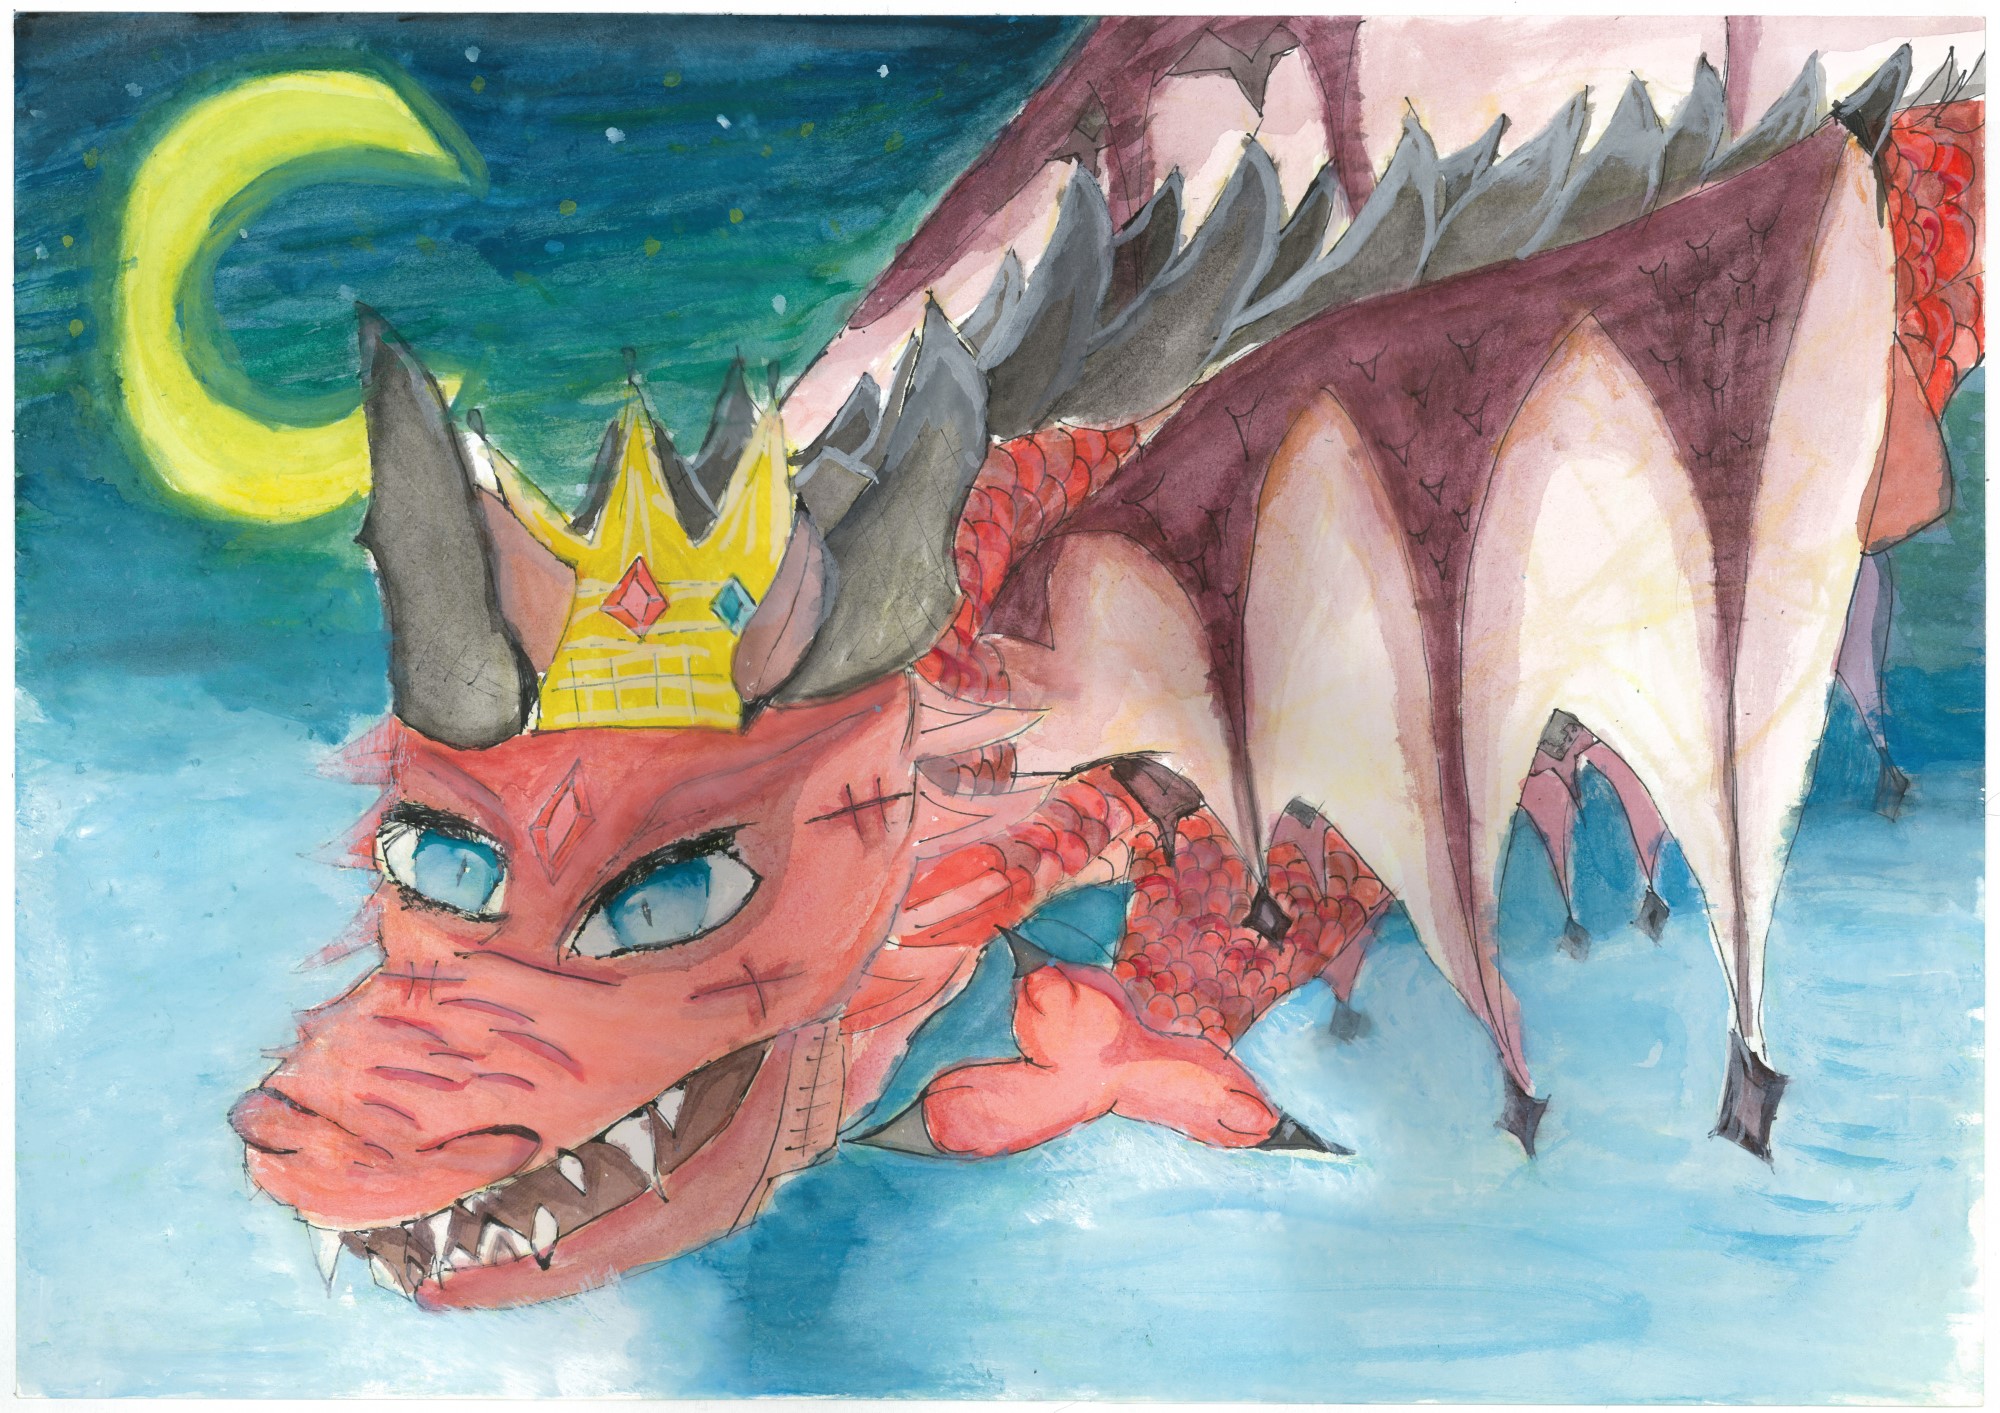 student artwork - A dragon flapping in the moonlit night